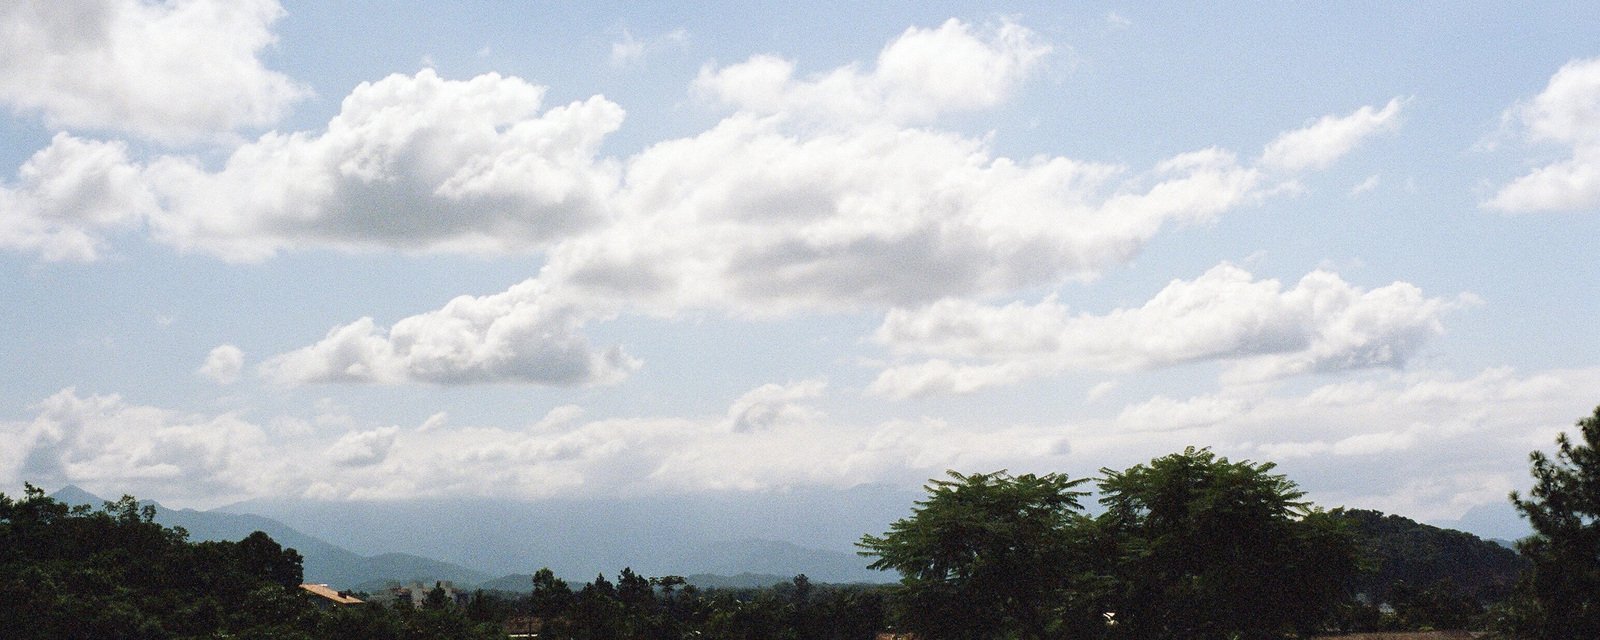 a large white clouds over trees on a hill